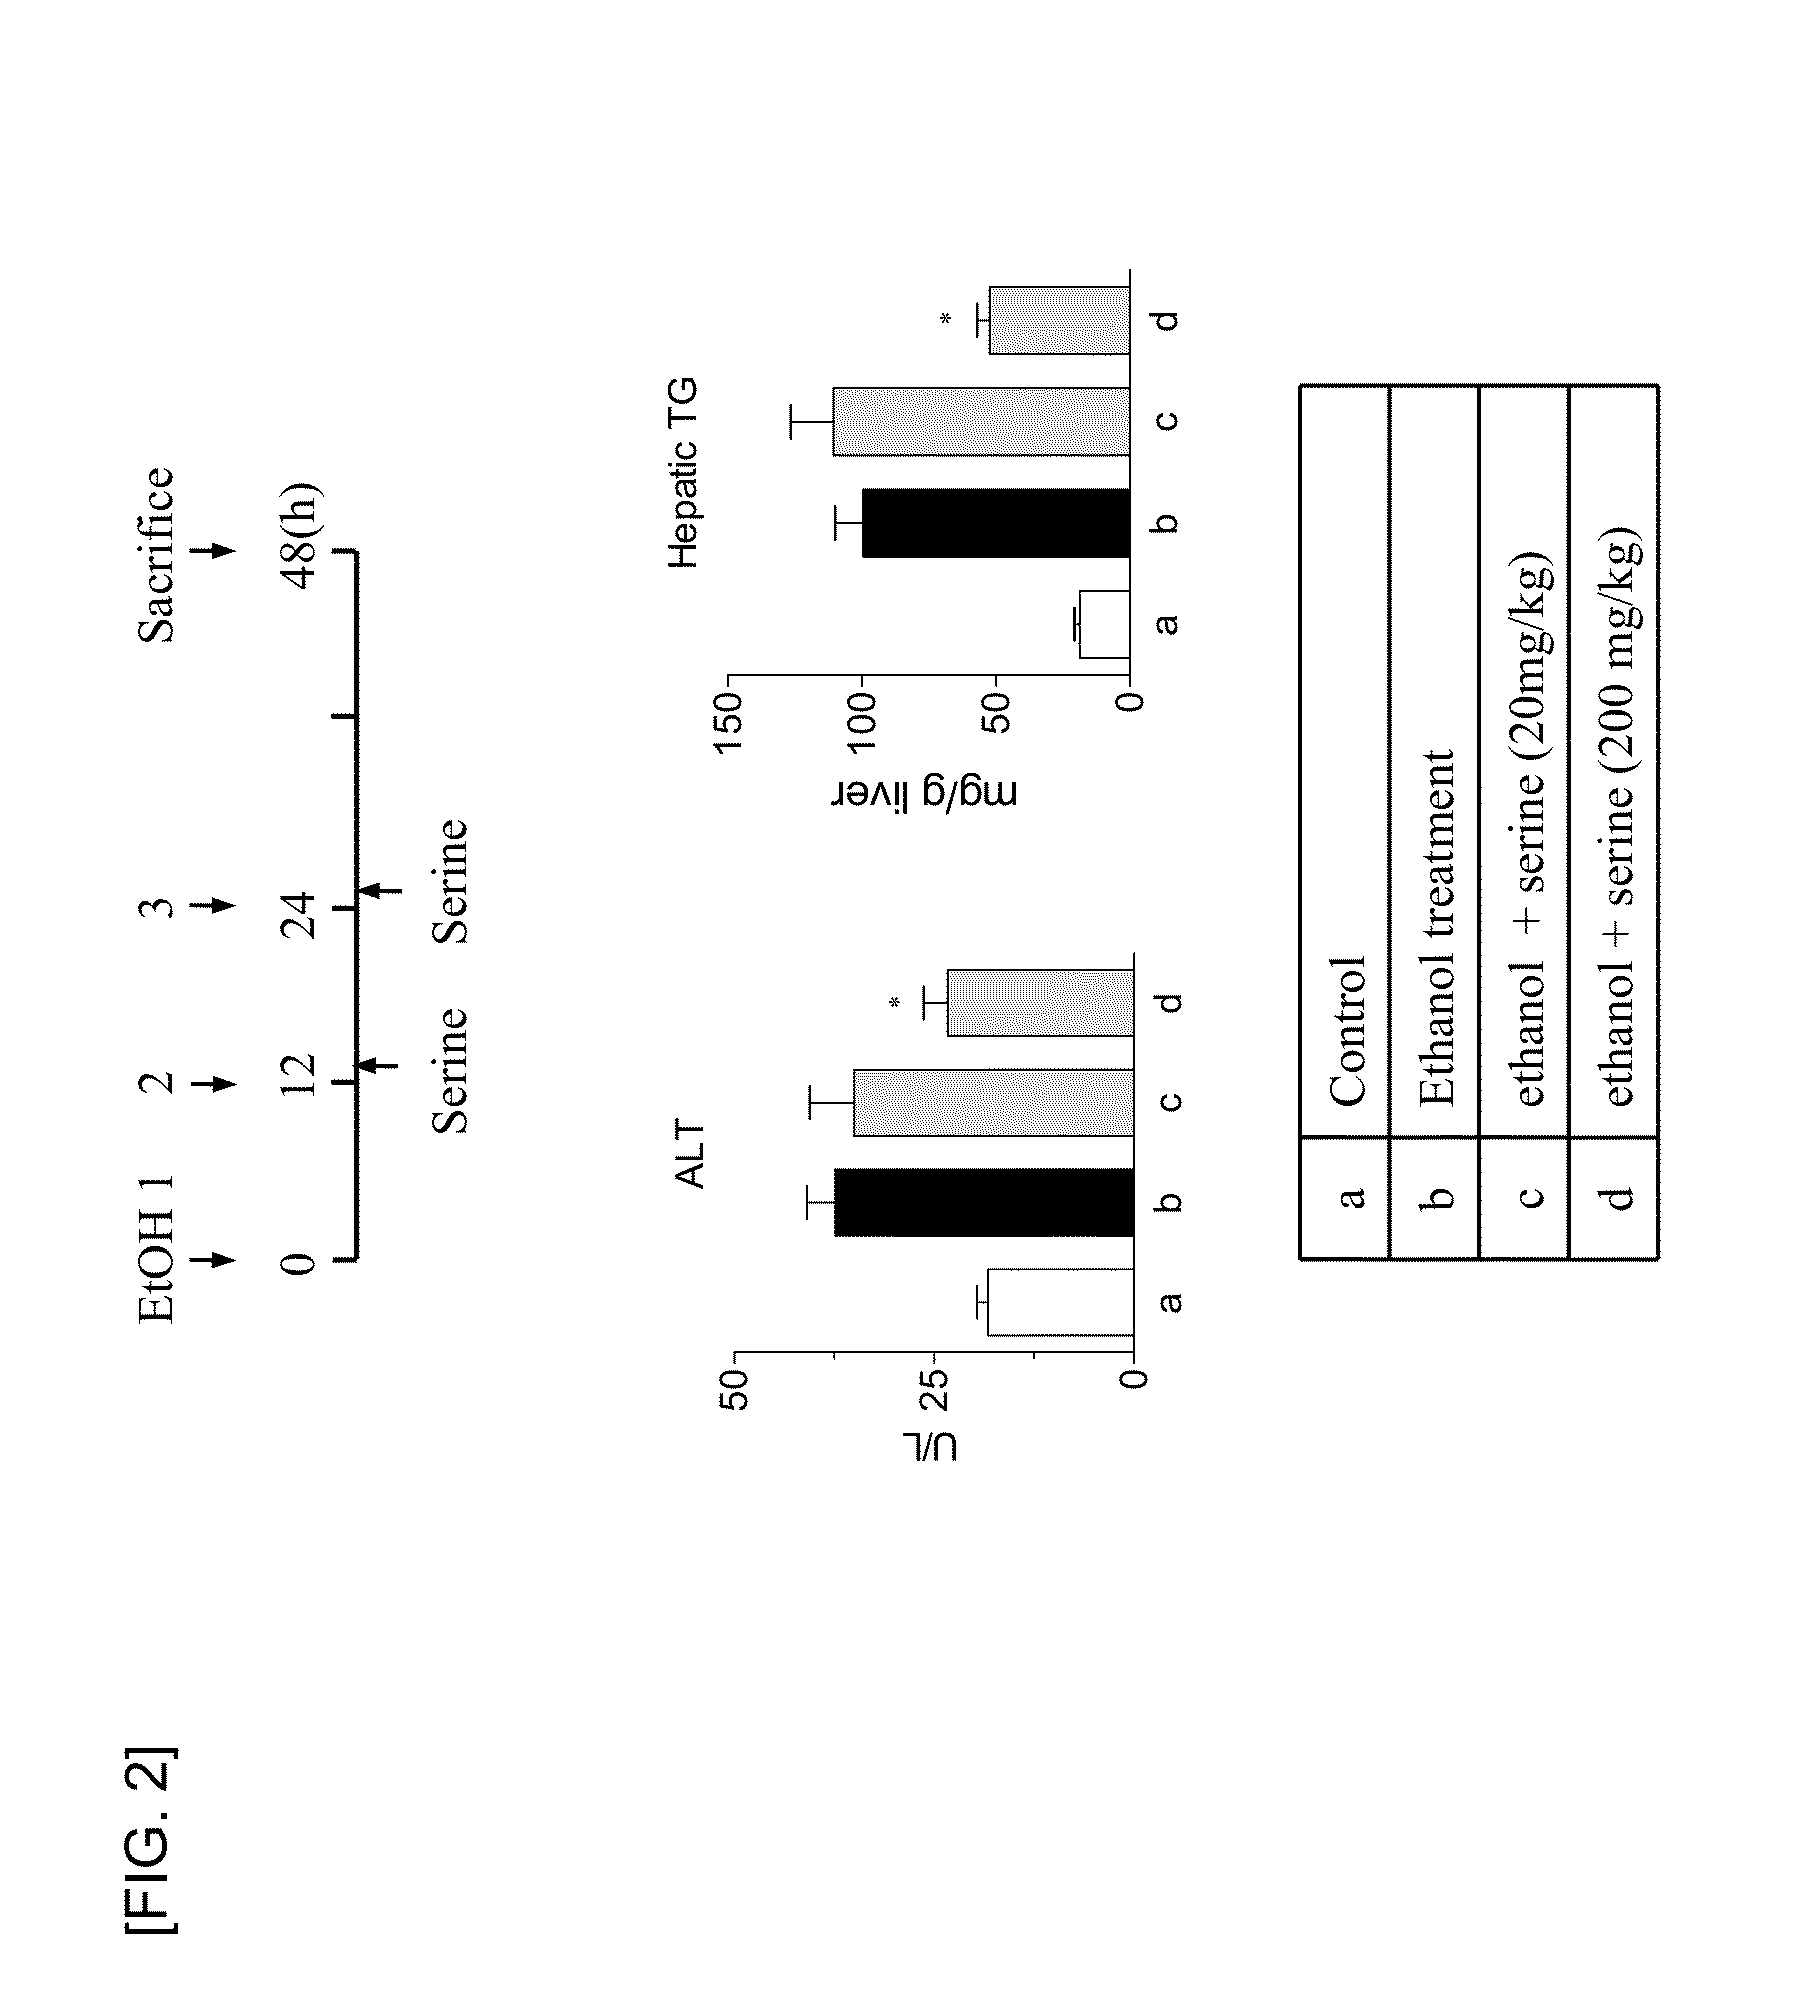 Composition containing serine as an active ingredient for the prevention and treatment of fatty liver diseases, and the use thereof